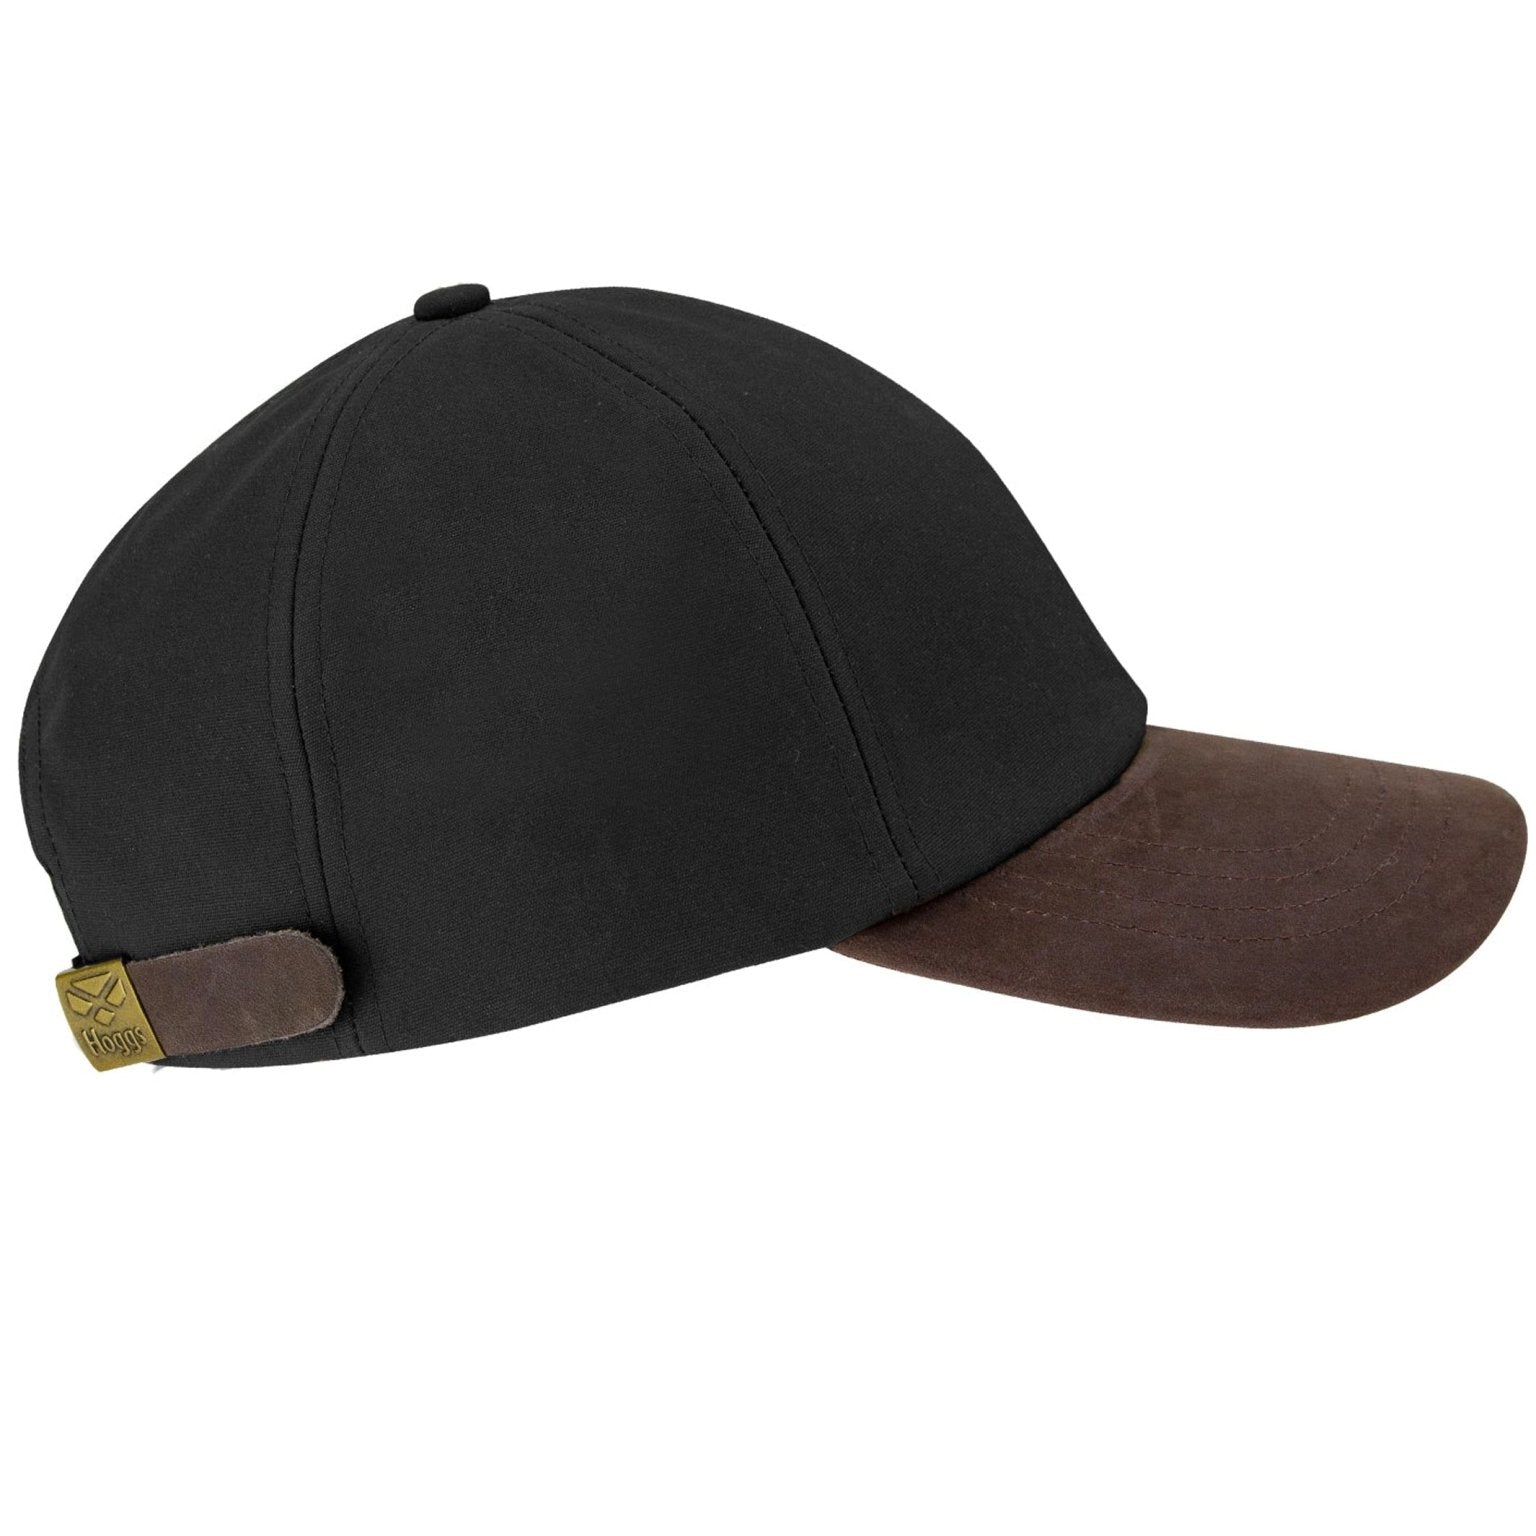 4elementsclothingHoggs of FifeHoggs of Fife - Waxed Water resistant Baseball CapHatsBBCP/NV/1